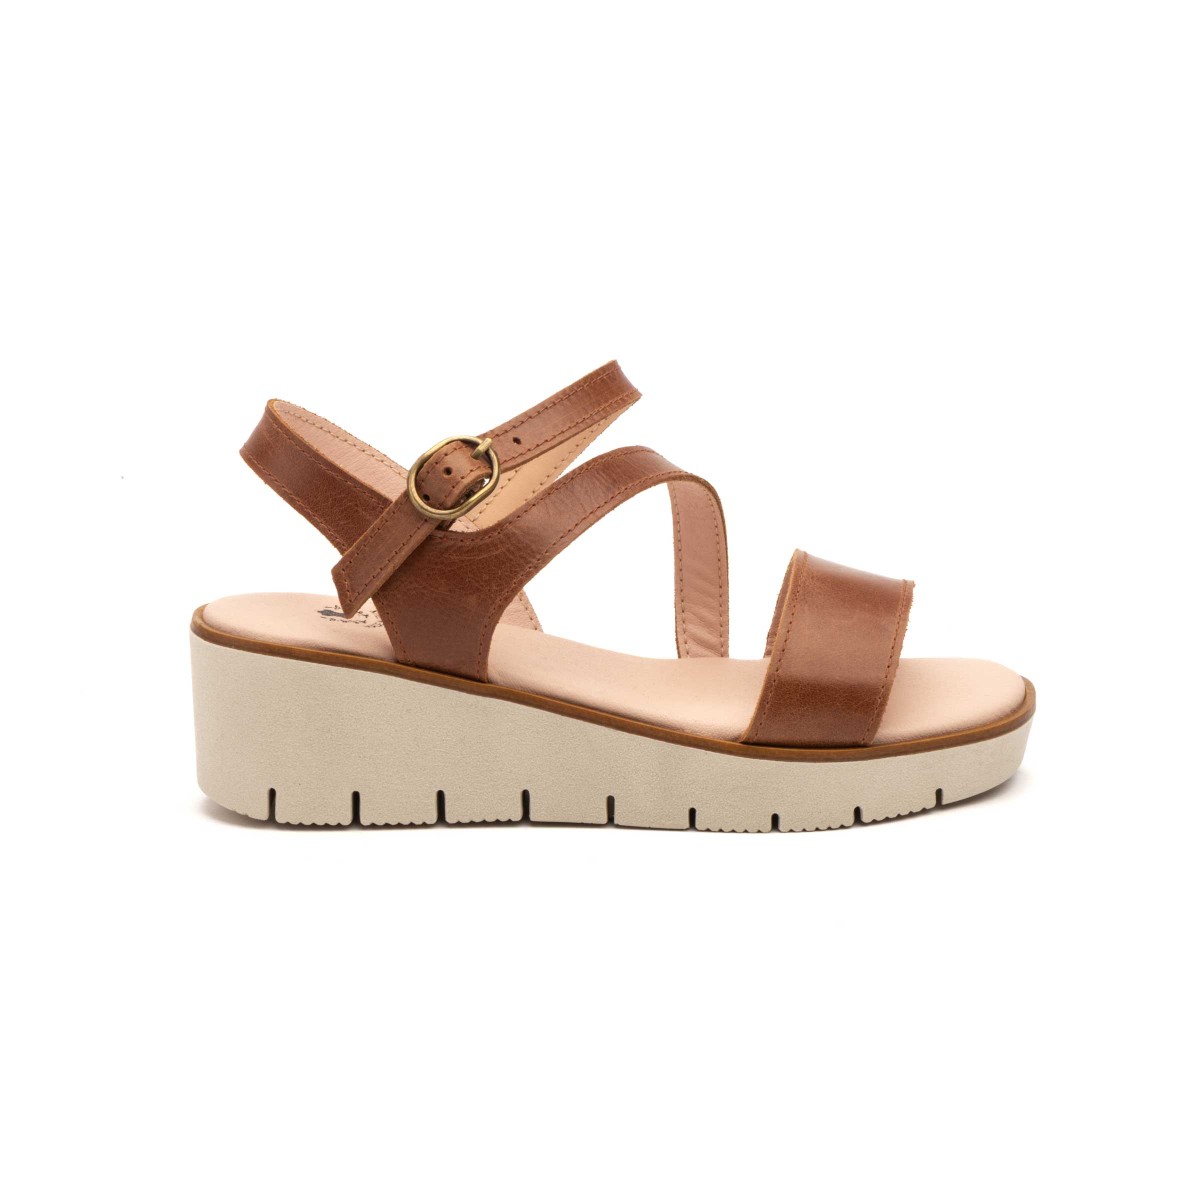 Brown leather sandals with wedge by CBP